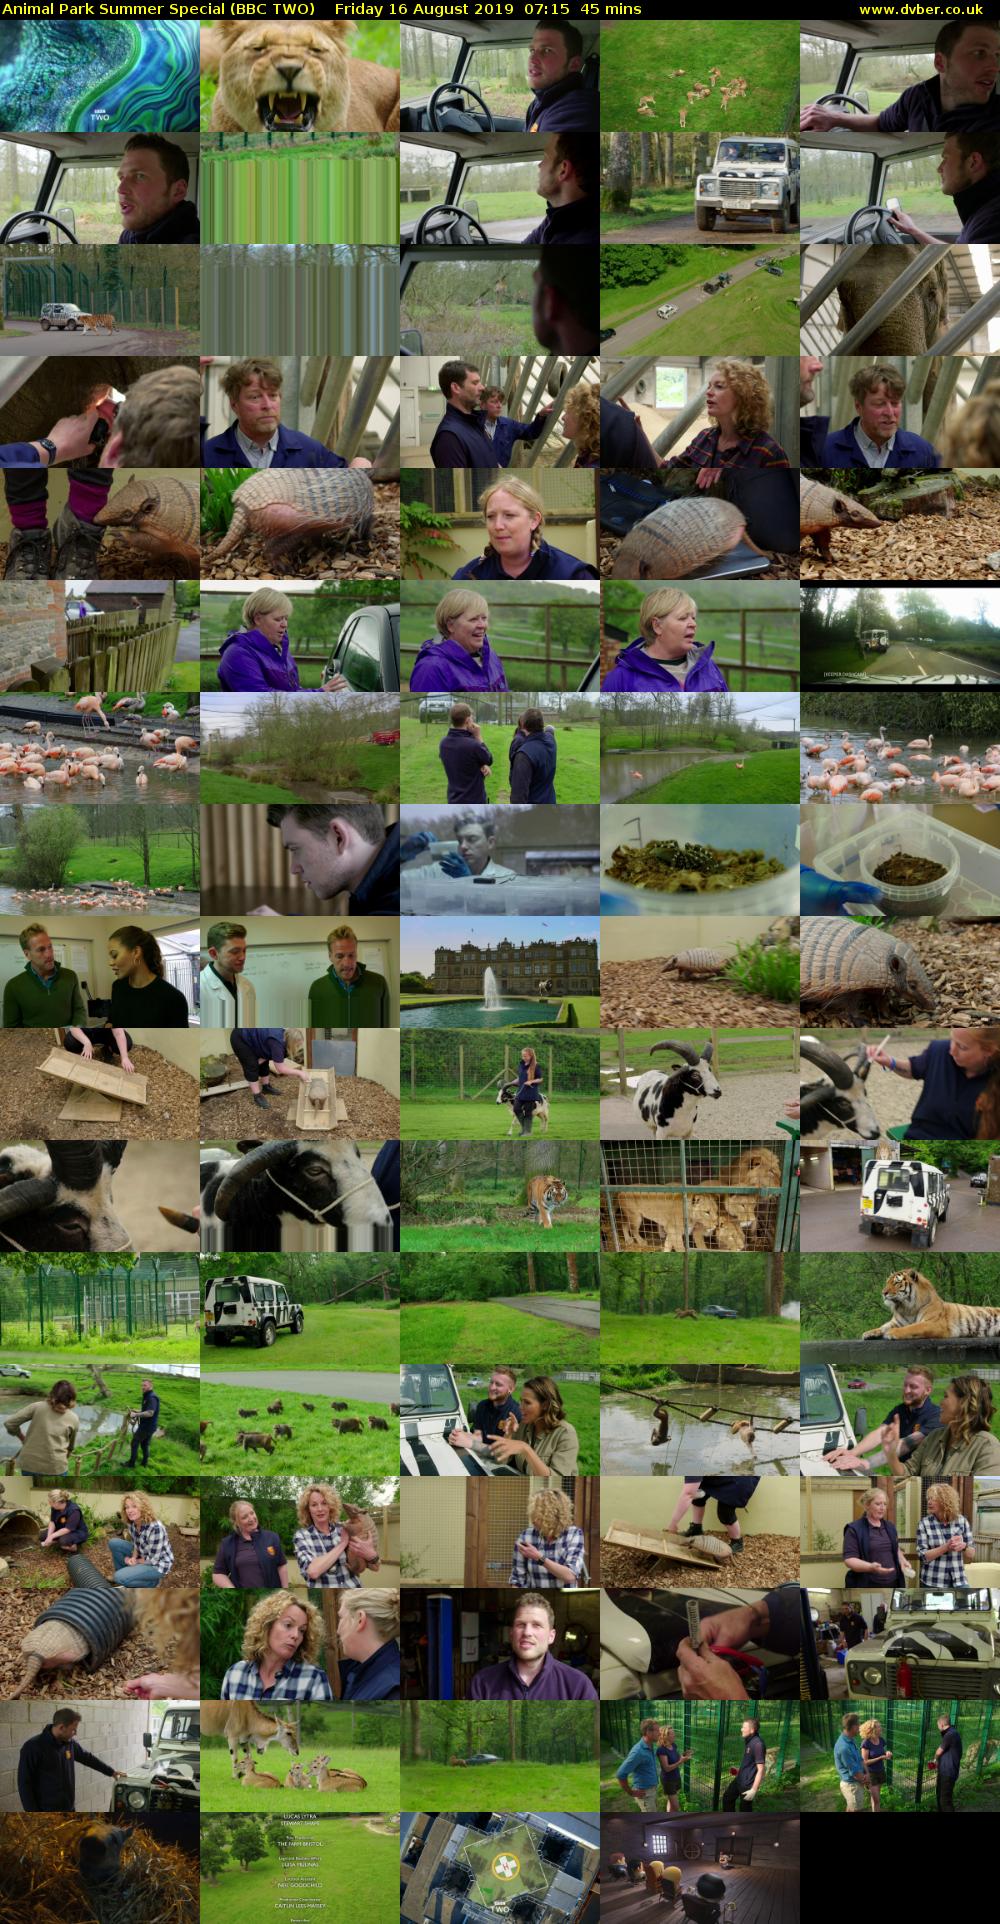 Animal Park Summer Special (BBC TWO) Friday 16 August 2019 07:15 - 08:00